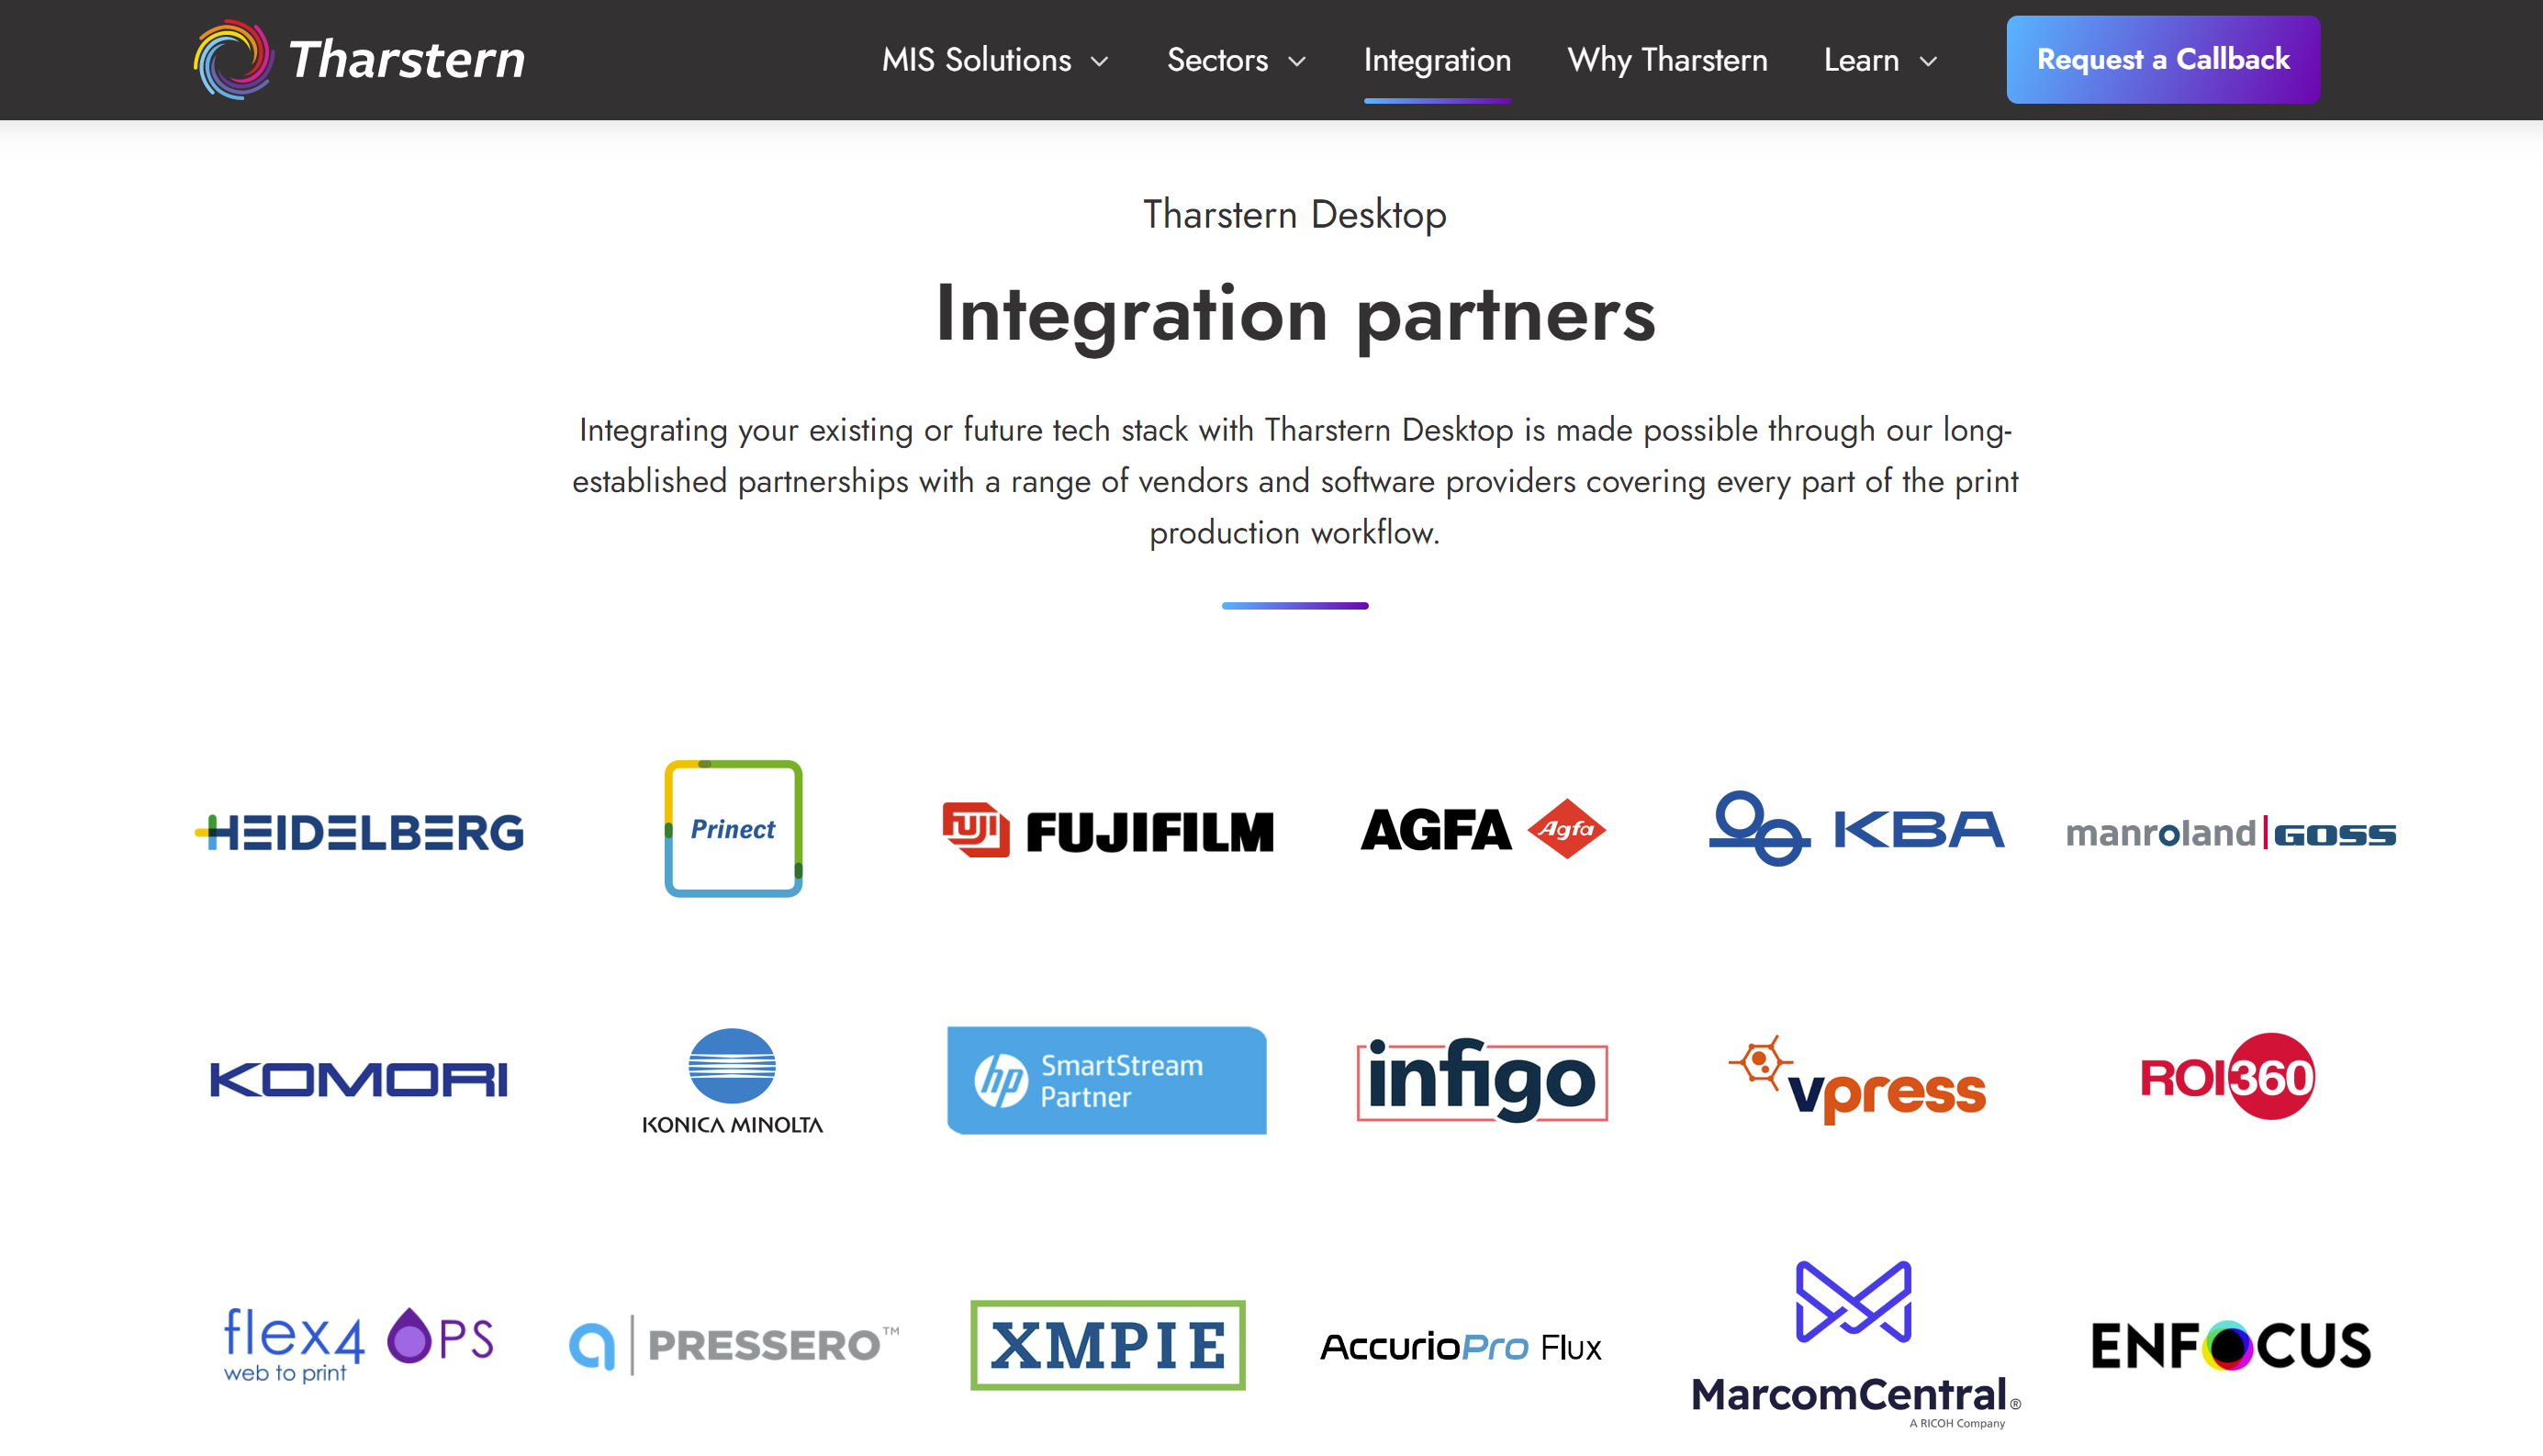 Links to Integration Partners